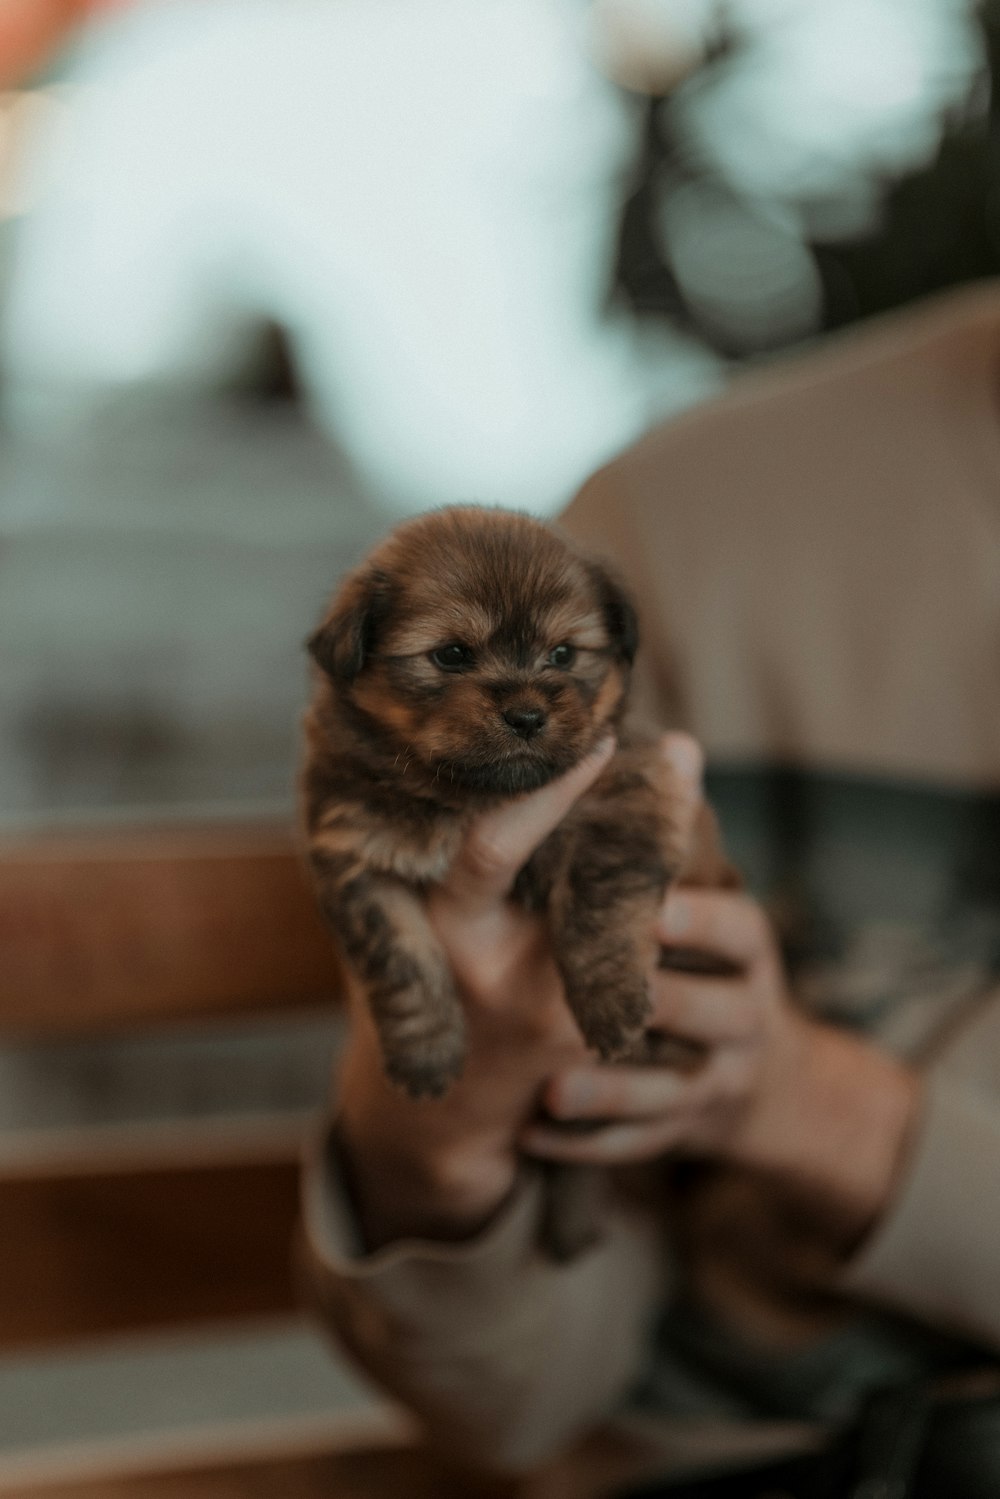 a person holding a small puppy in their hands